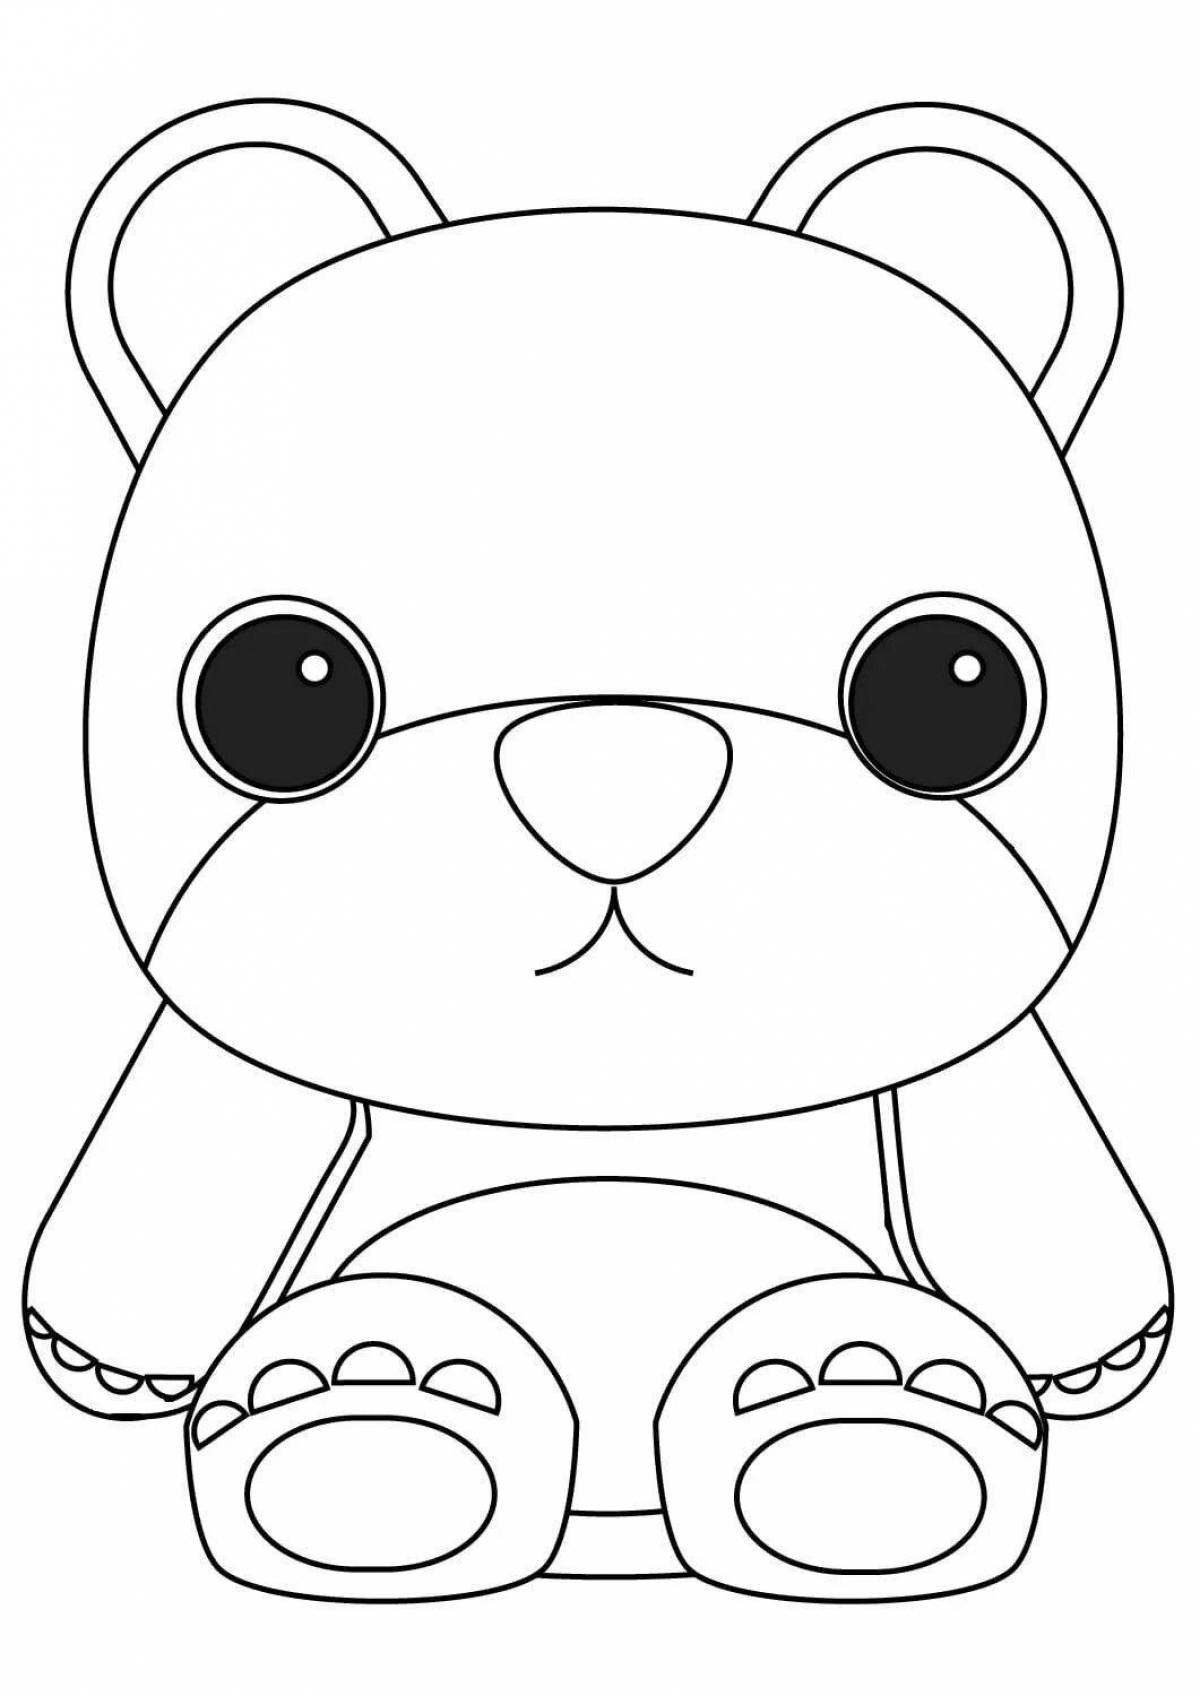 Soft toys for coloring